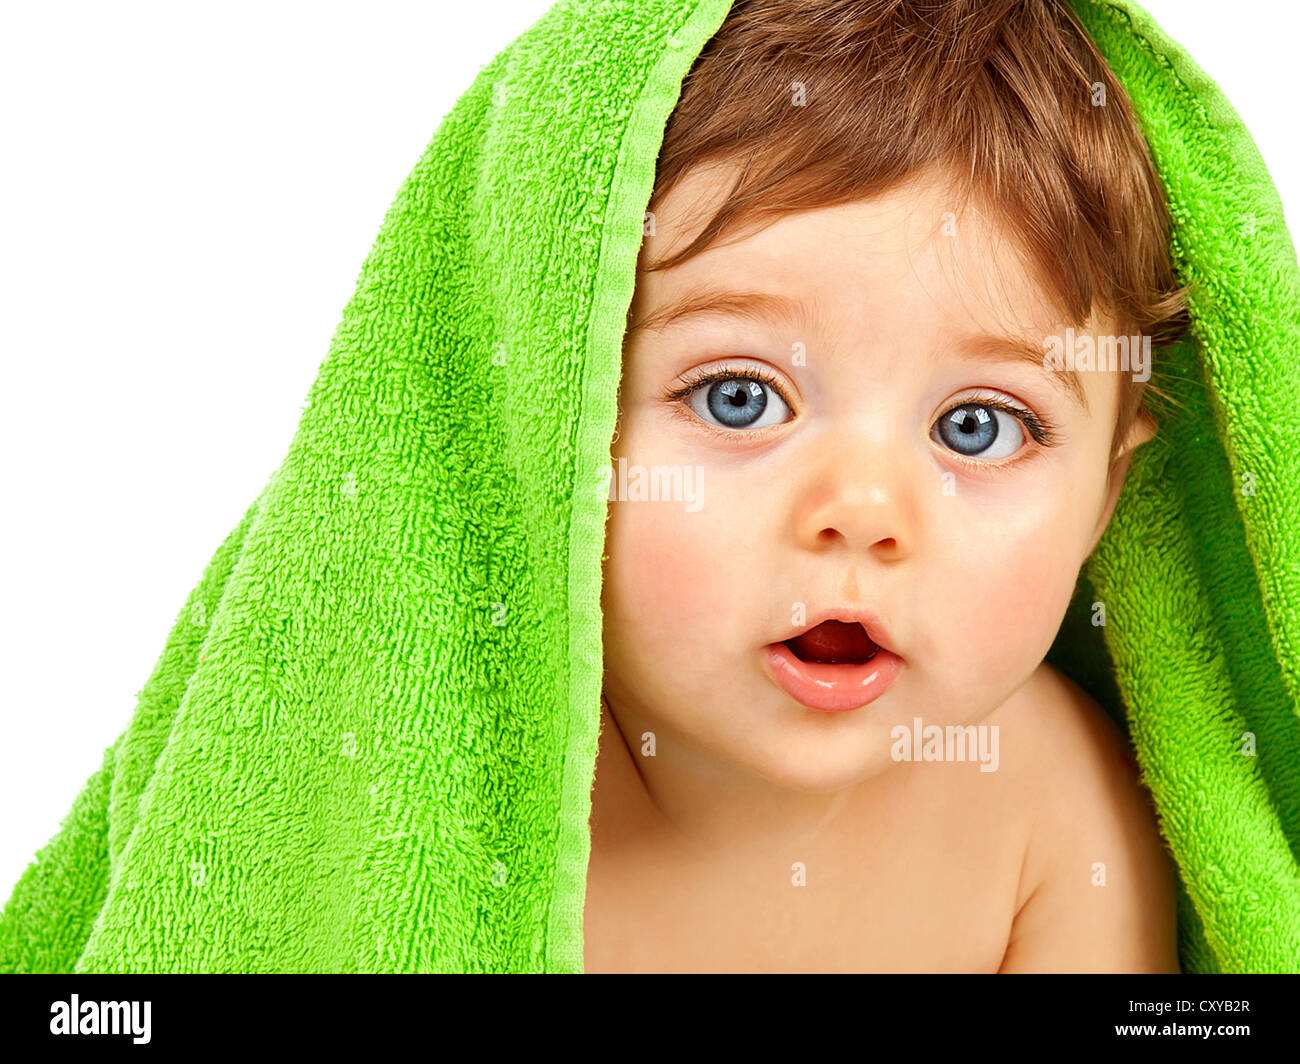 Image of cute baby boy covered green towel isolated on white ...